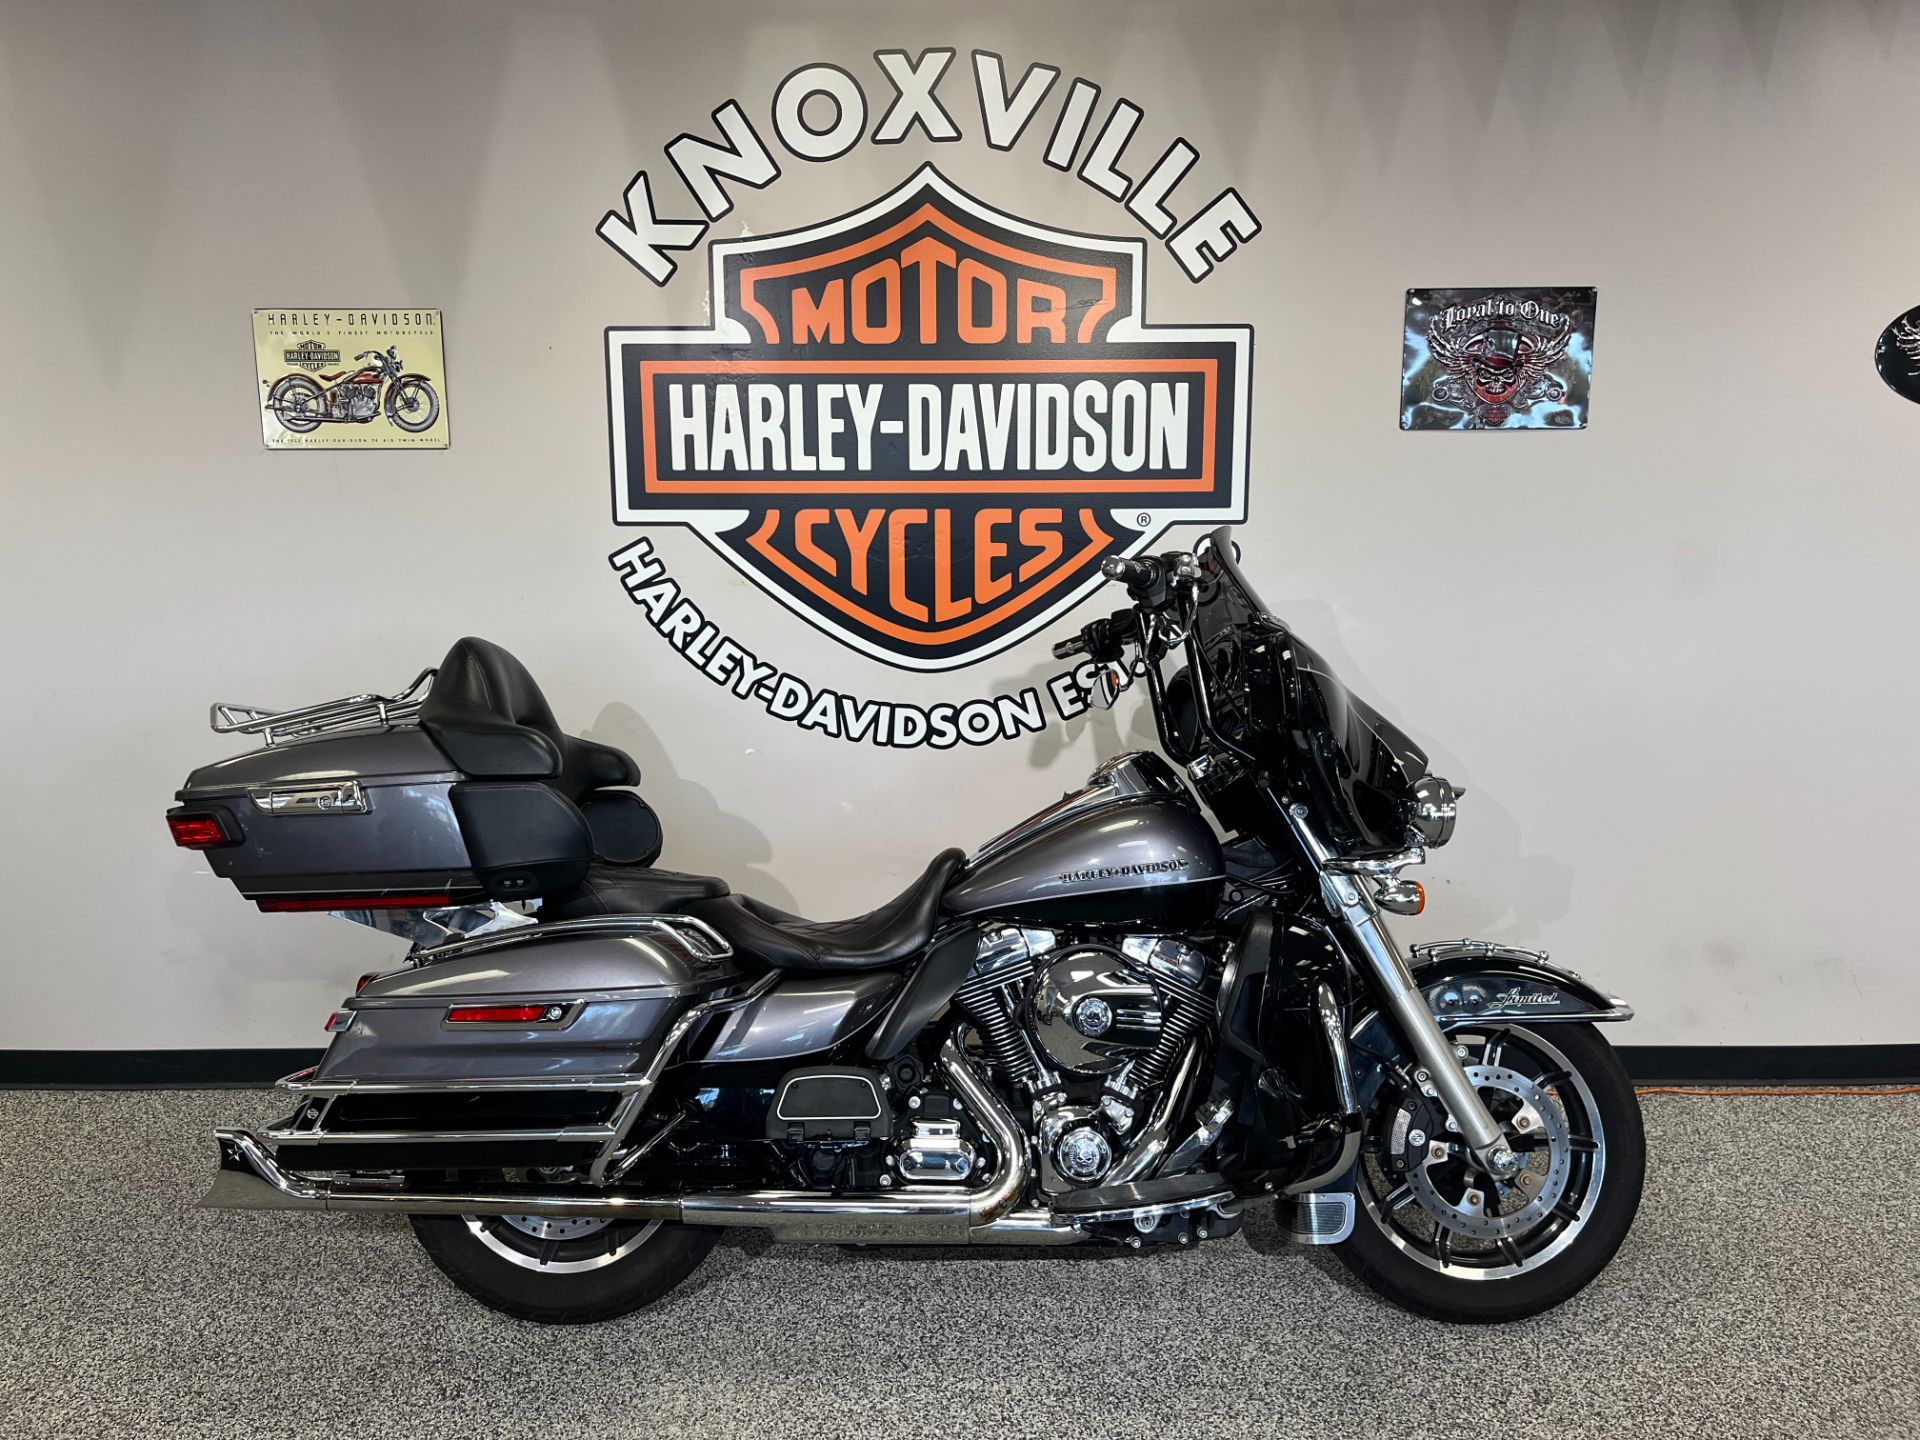 2014 Harley-Davidson ELECTRA GLIDE ULTRA in Knoxville, Tennessee - Photo 1